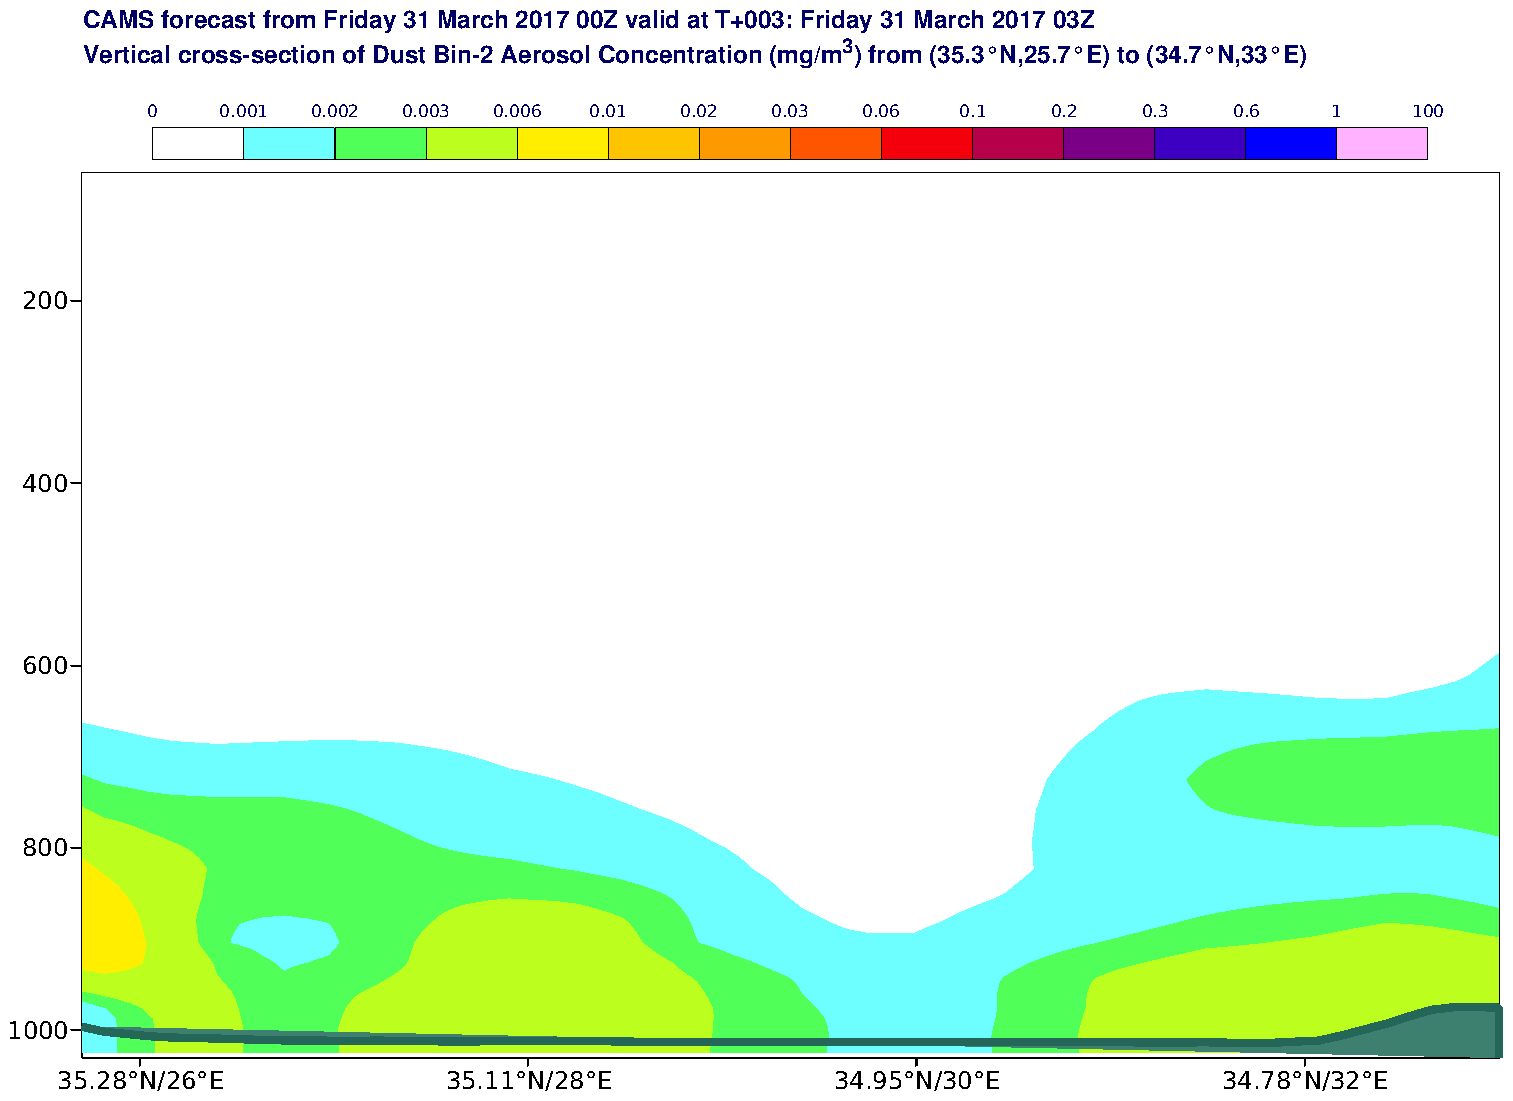 Vertical cross-section of Dust Bin-2 Aerosol Concentration (mg/m3) valid at T3 - 2017-03-31 03:00